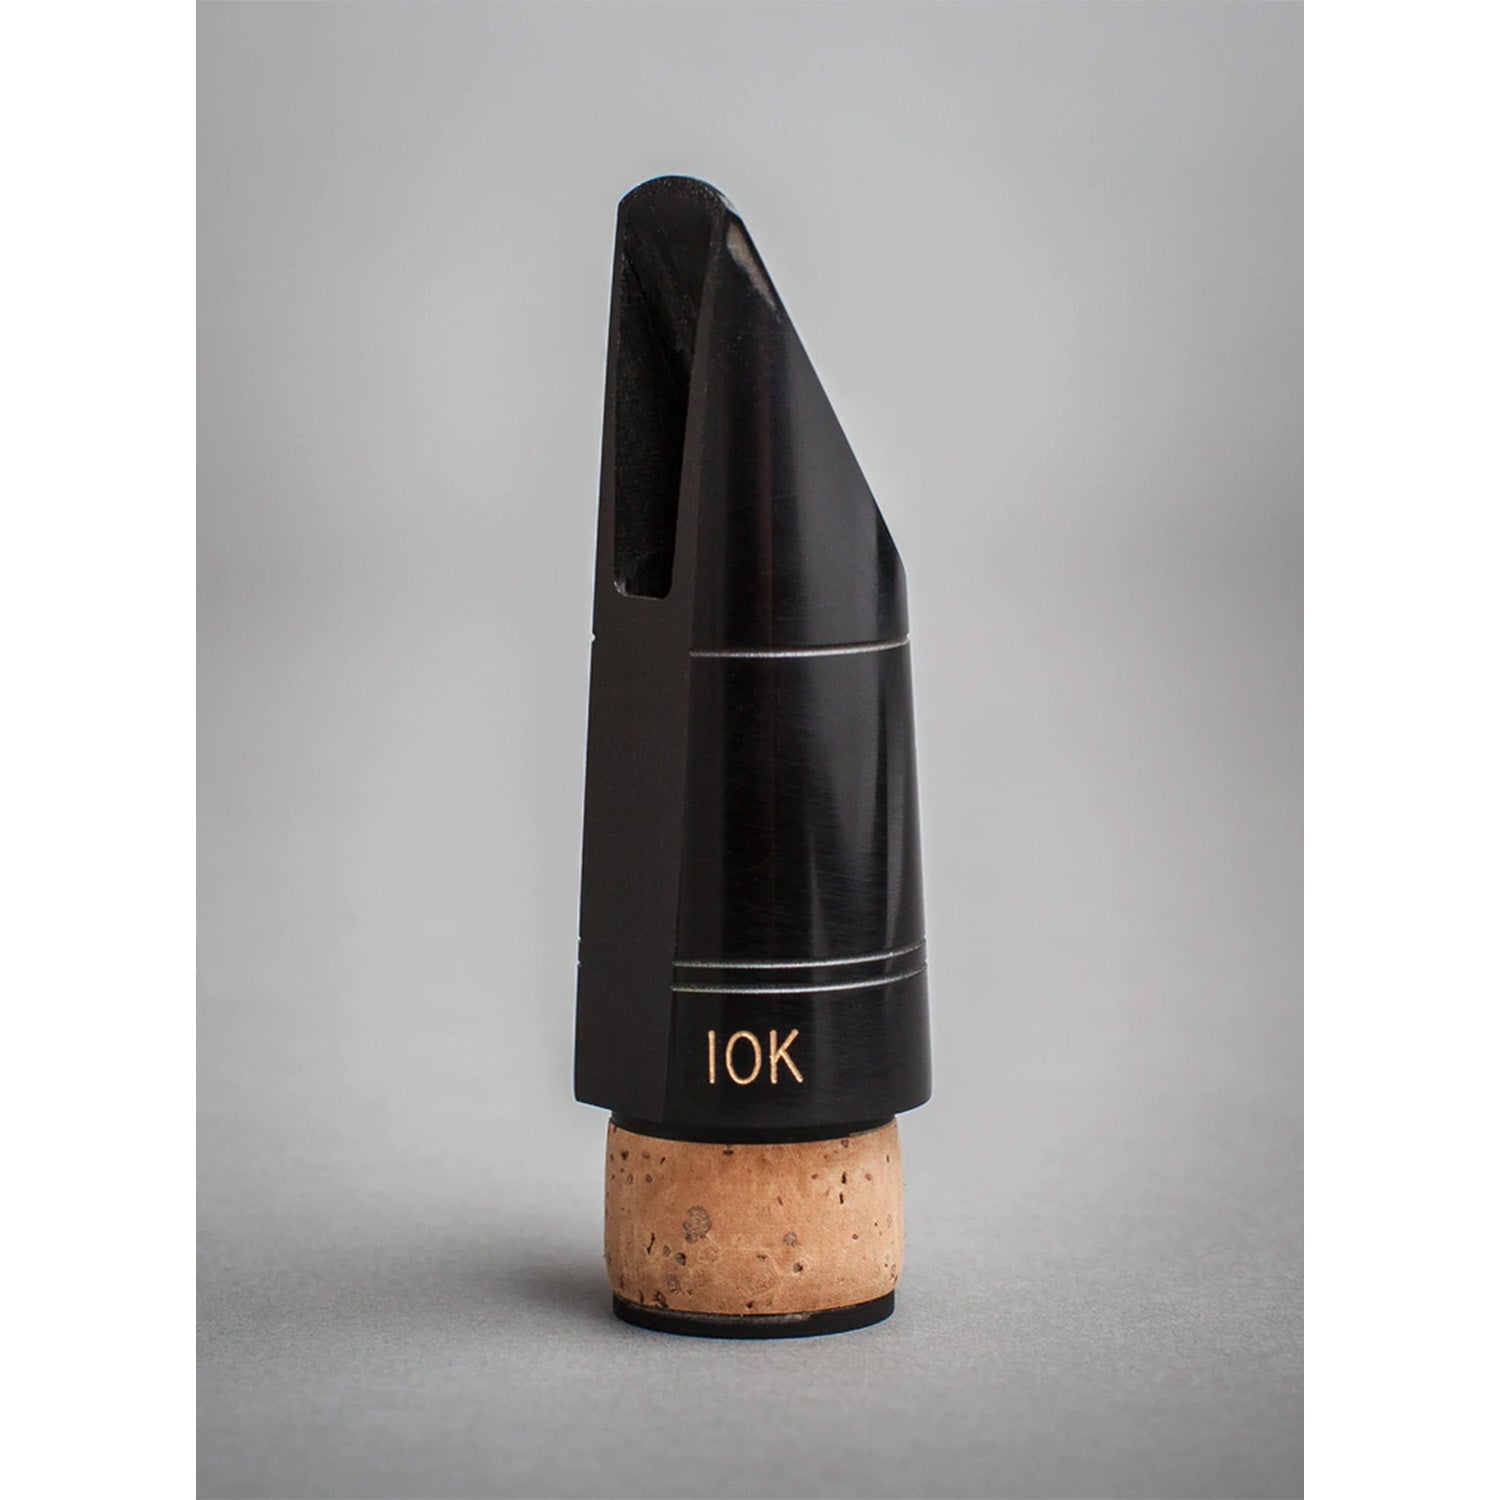 Three-quarters side view of black Fobes 10k Bb mouthpiece on a gray background